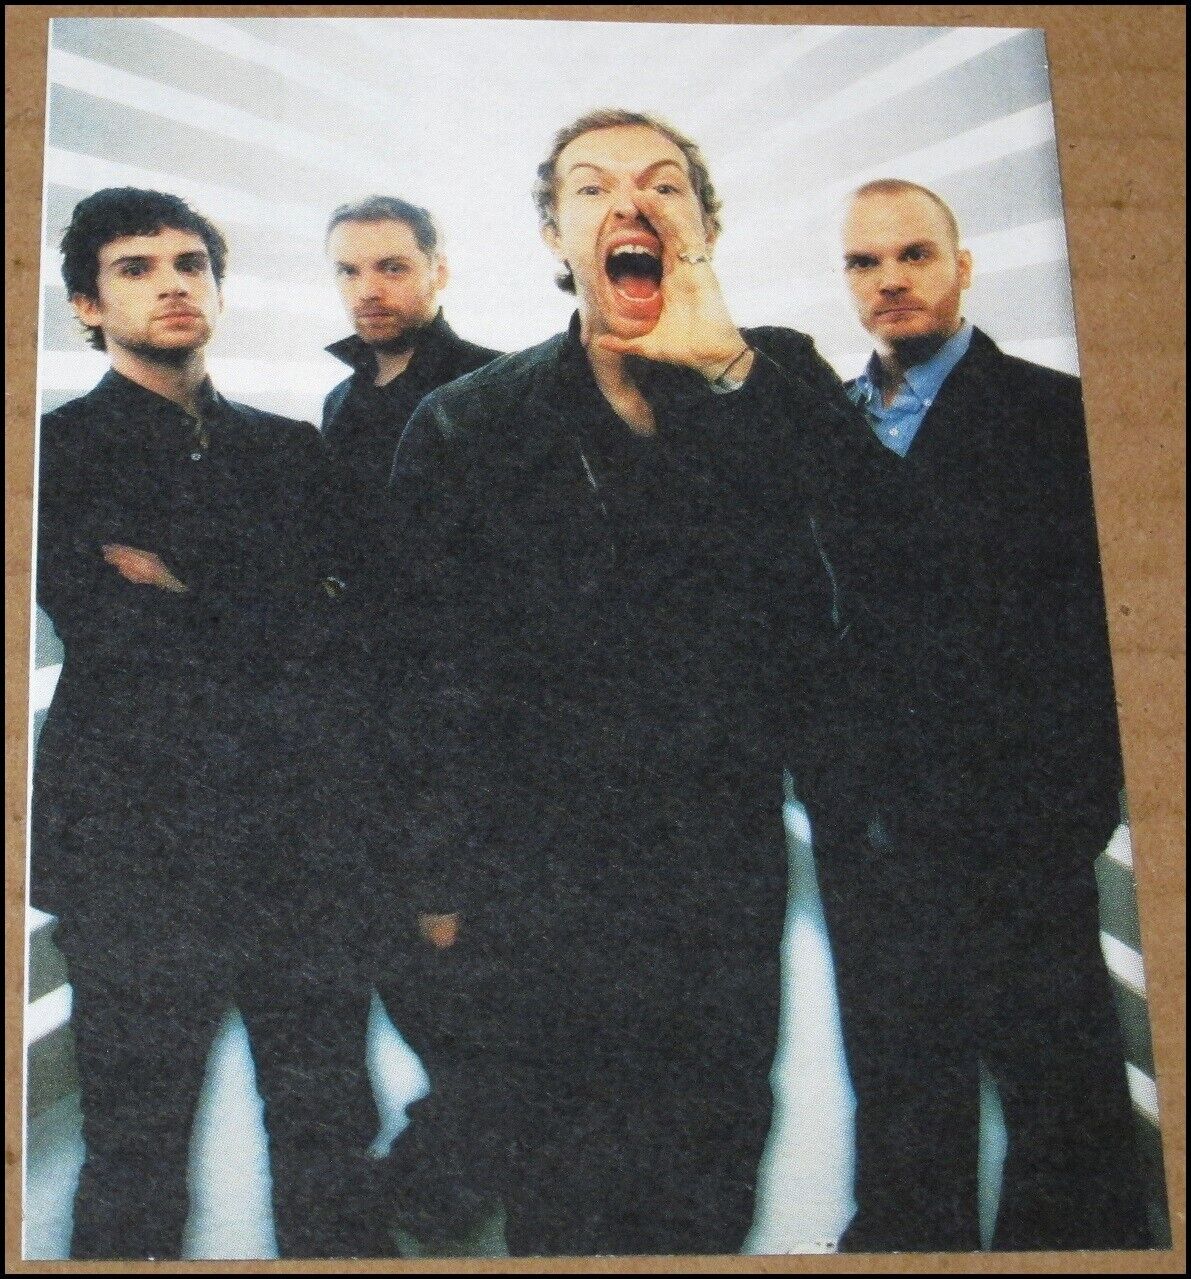 2005 Coldplay NME Photo Clipping 3.75\